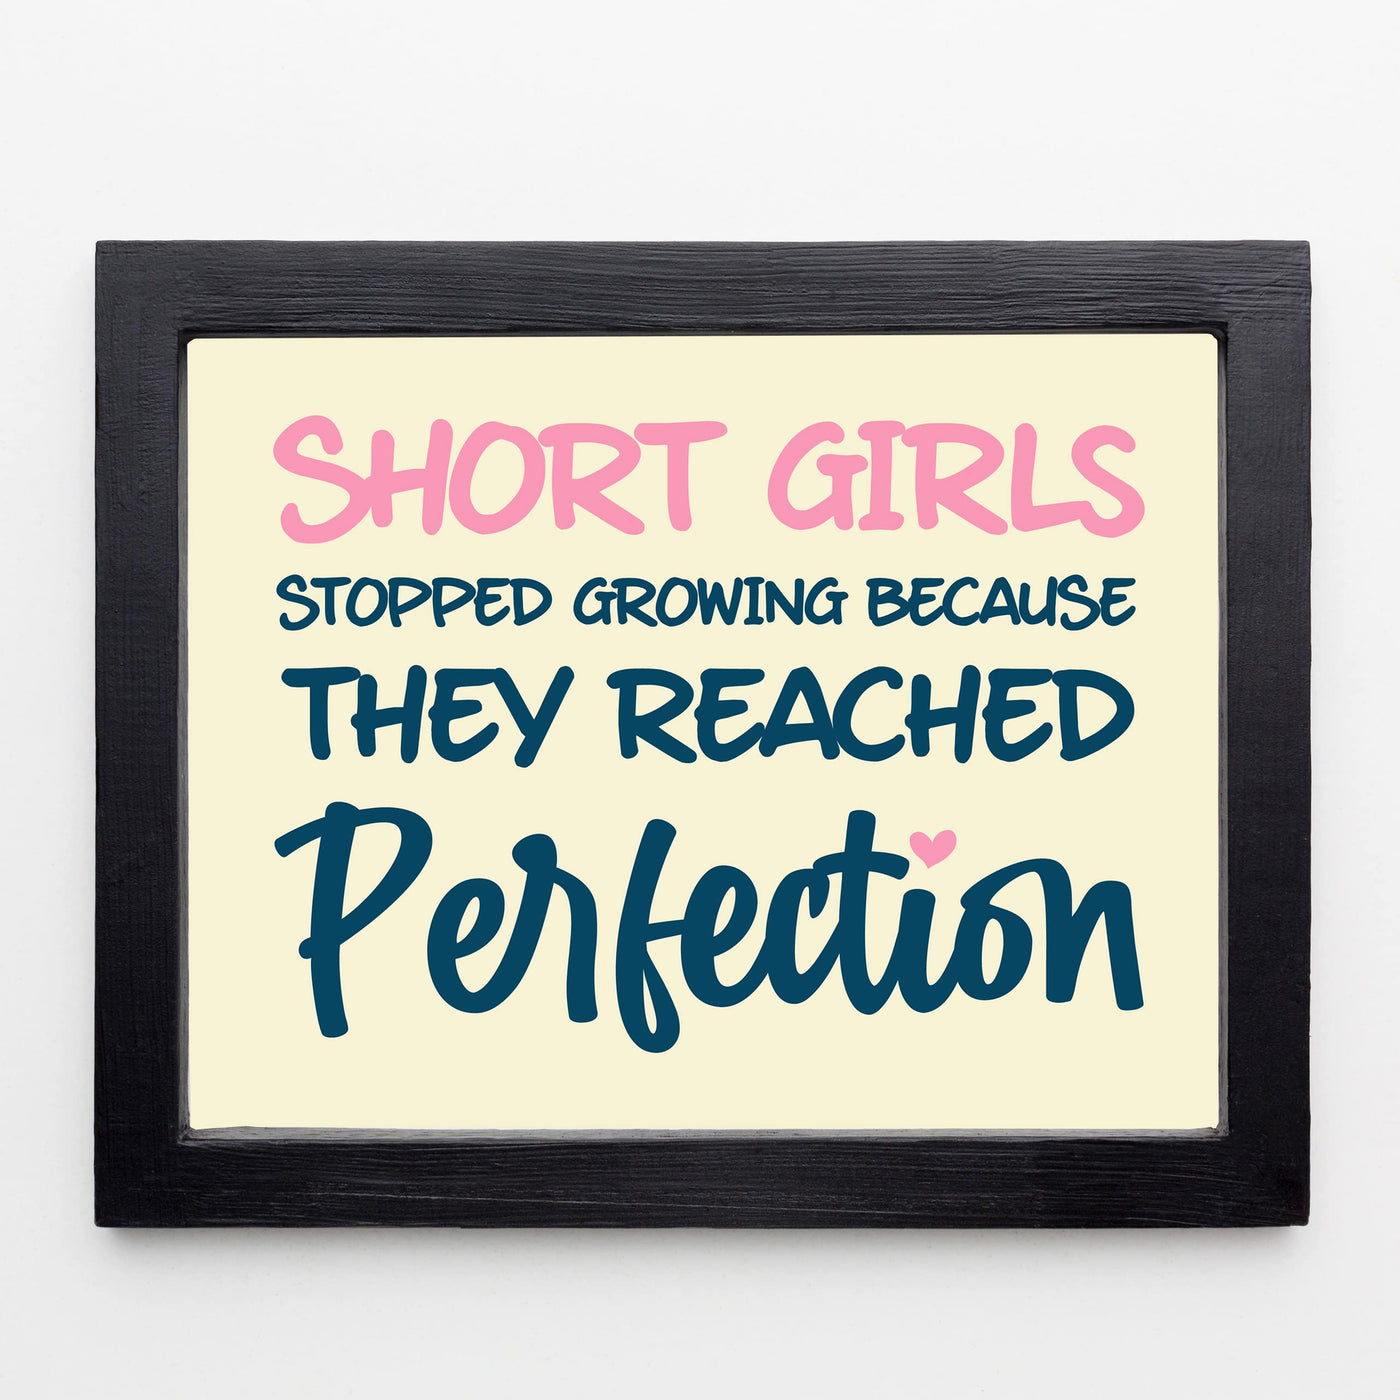 Short Girls Stopped Growing Because They Reached Perfection- Inspirational Quotes Wall Art -10 x 8" Funny Typography Print -Ready to Frame. Modern Home-Girls Bedroom-Teen Girl Decor! Great Gift!